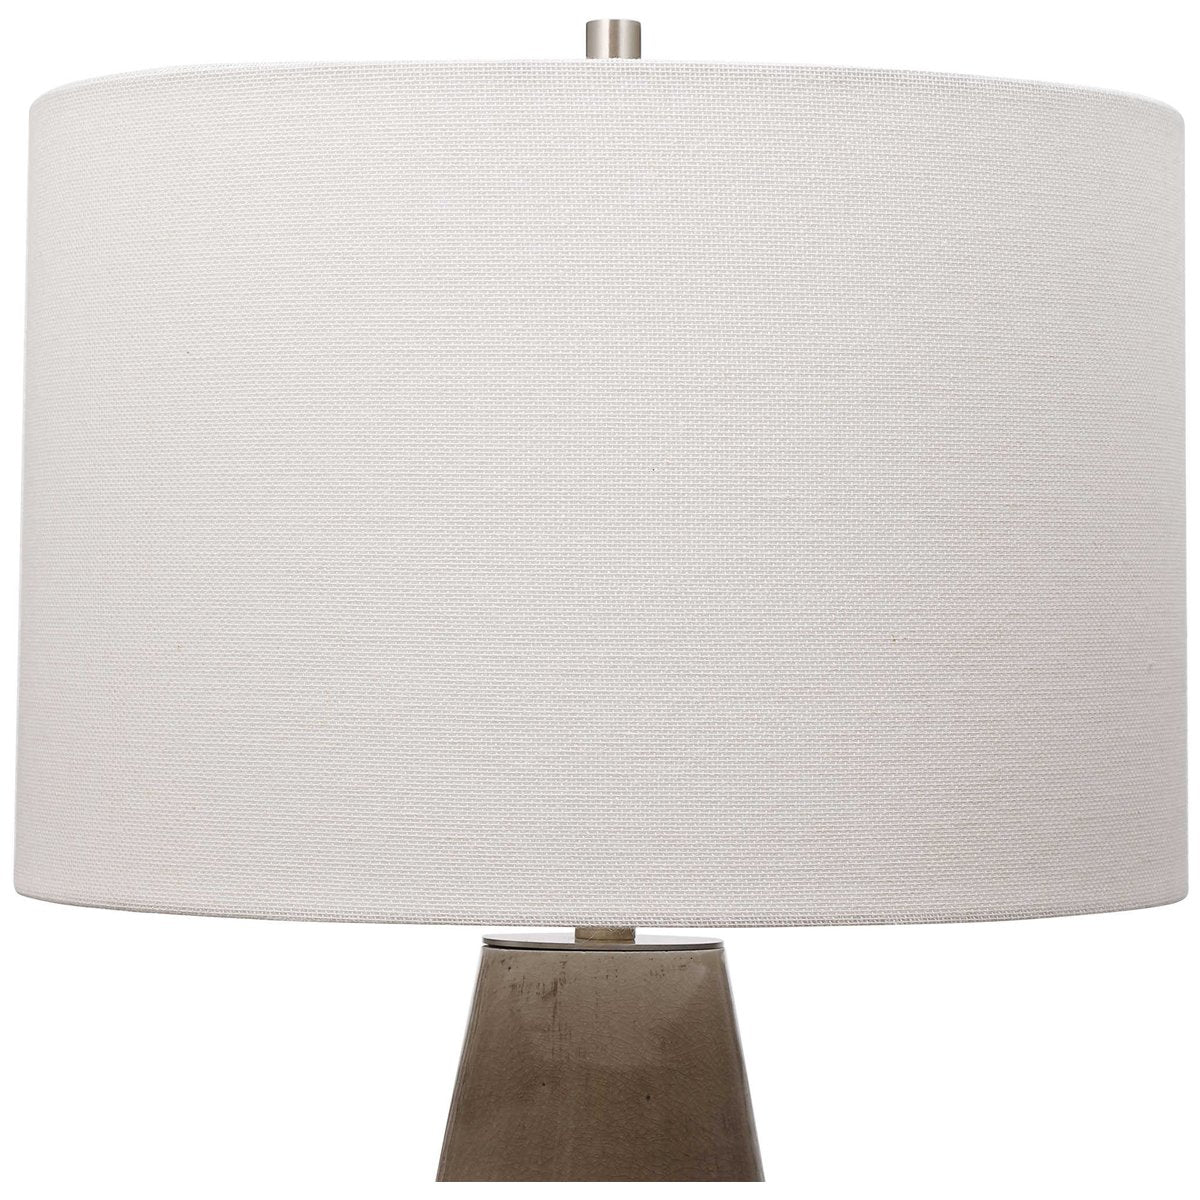 Uttermost Volterra Taupe-Gray Table Lamp